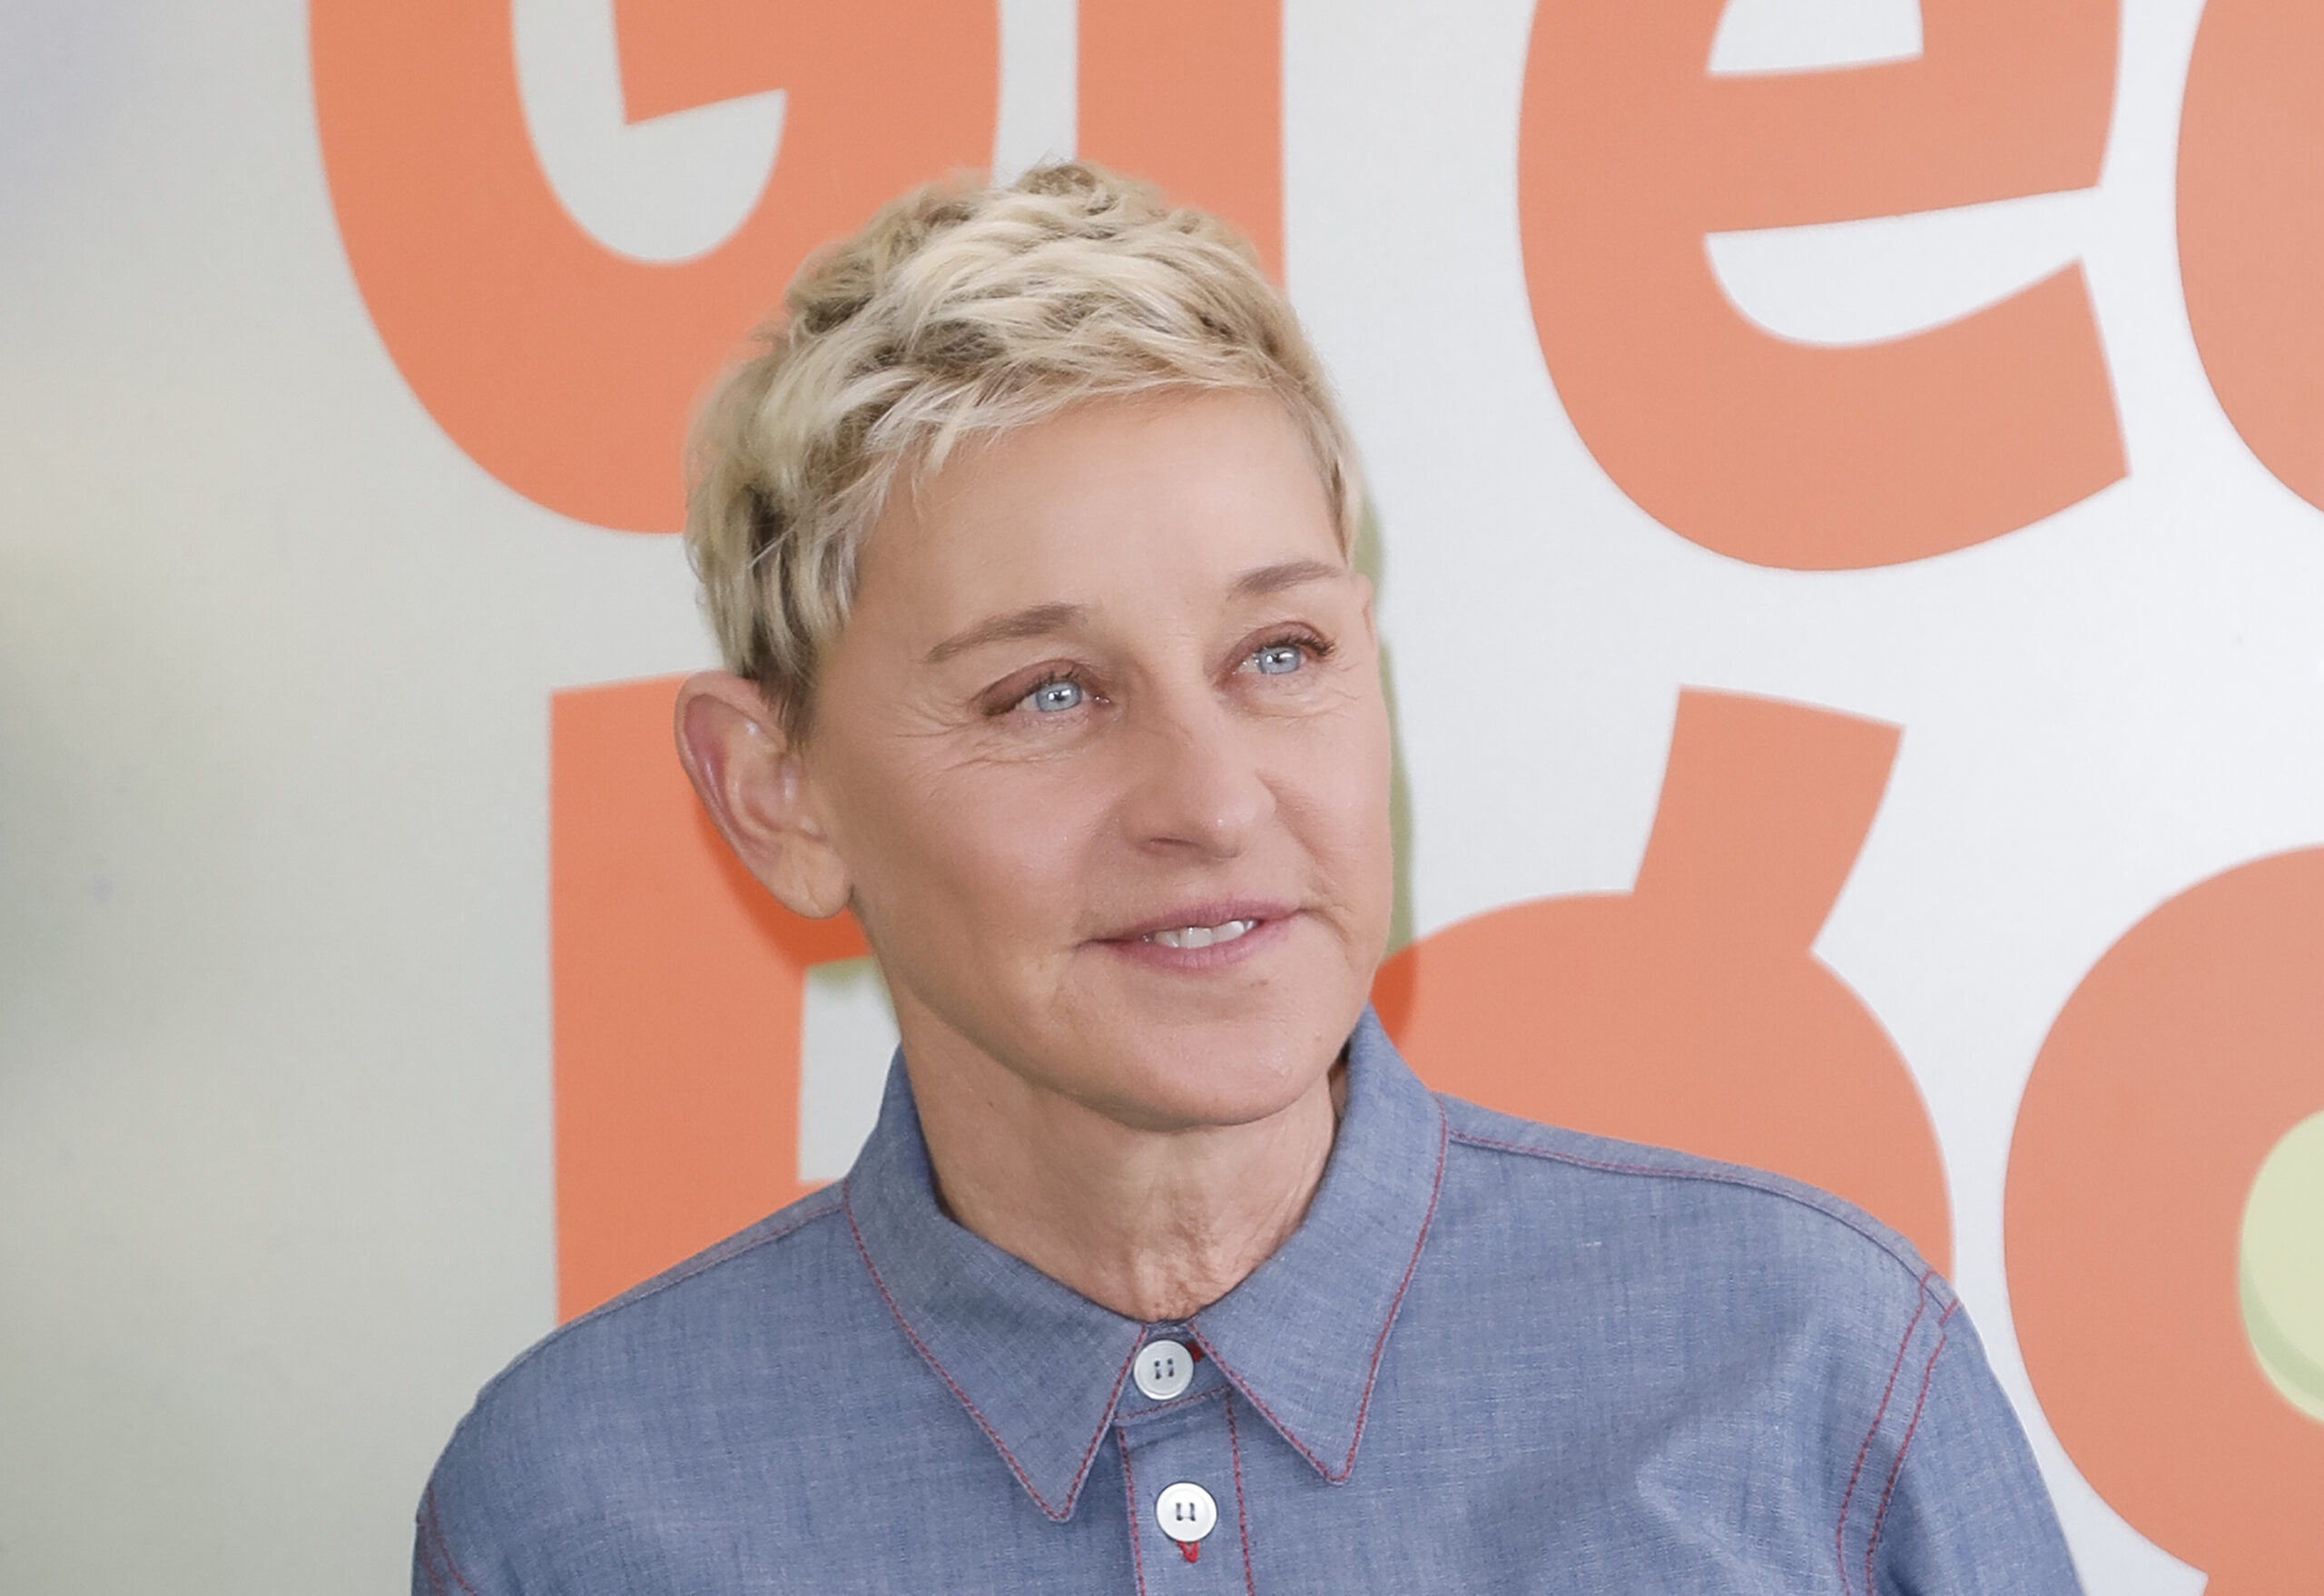 Ellen DeGeneres Opens Up About Challenges with Ending Daytime Show: ‘Took a Toll on My Ego